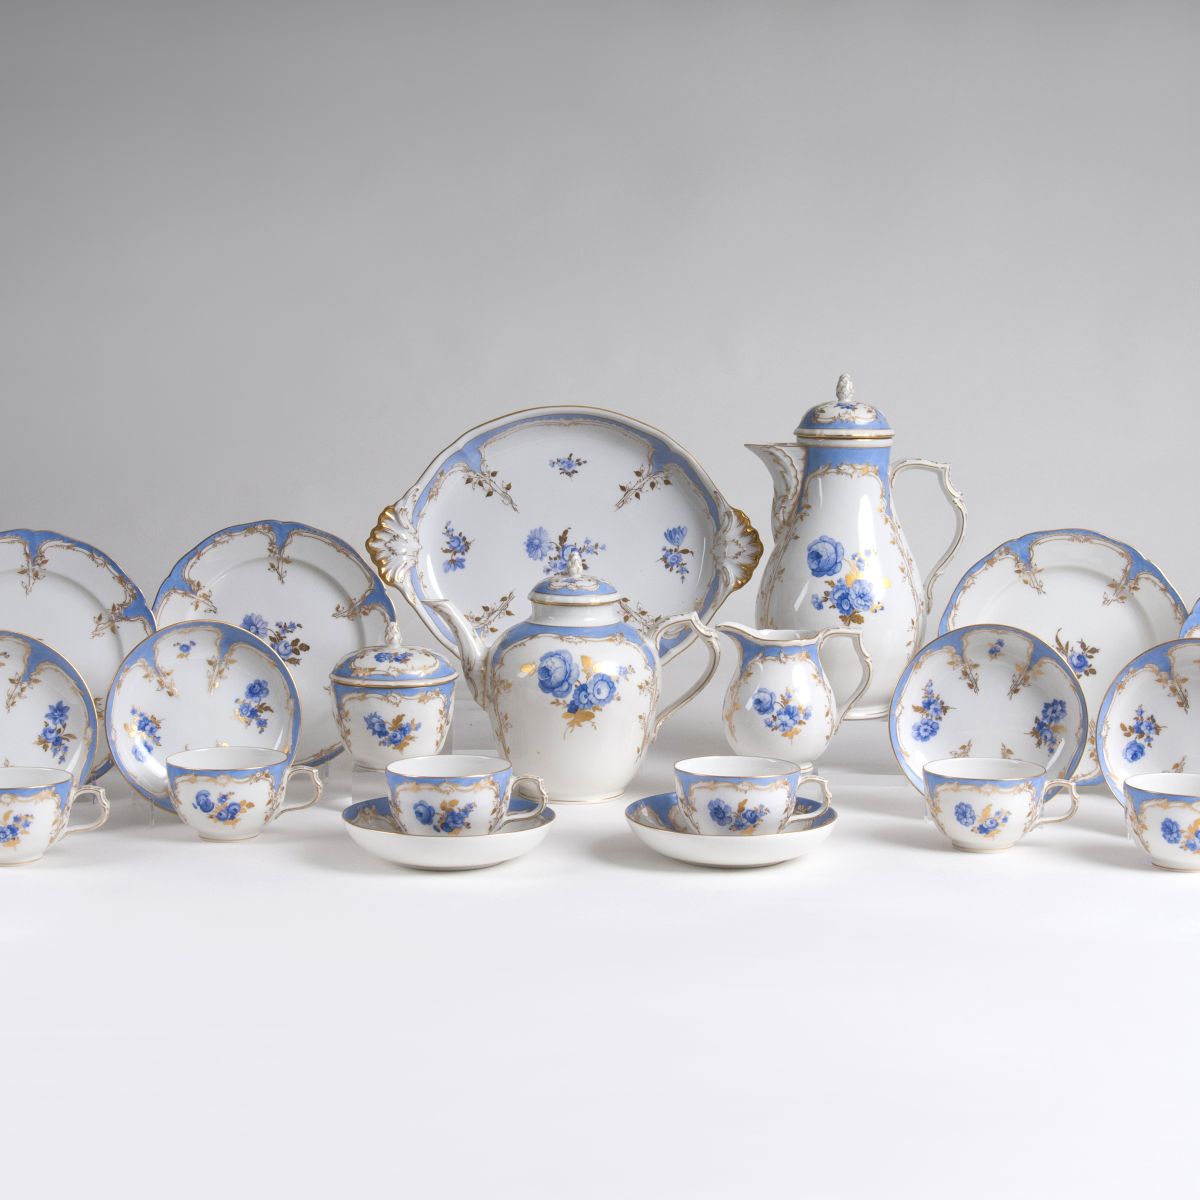 A Coffee and Tea Service 'Bleu mourant' for 12 persons